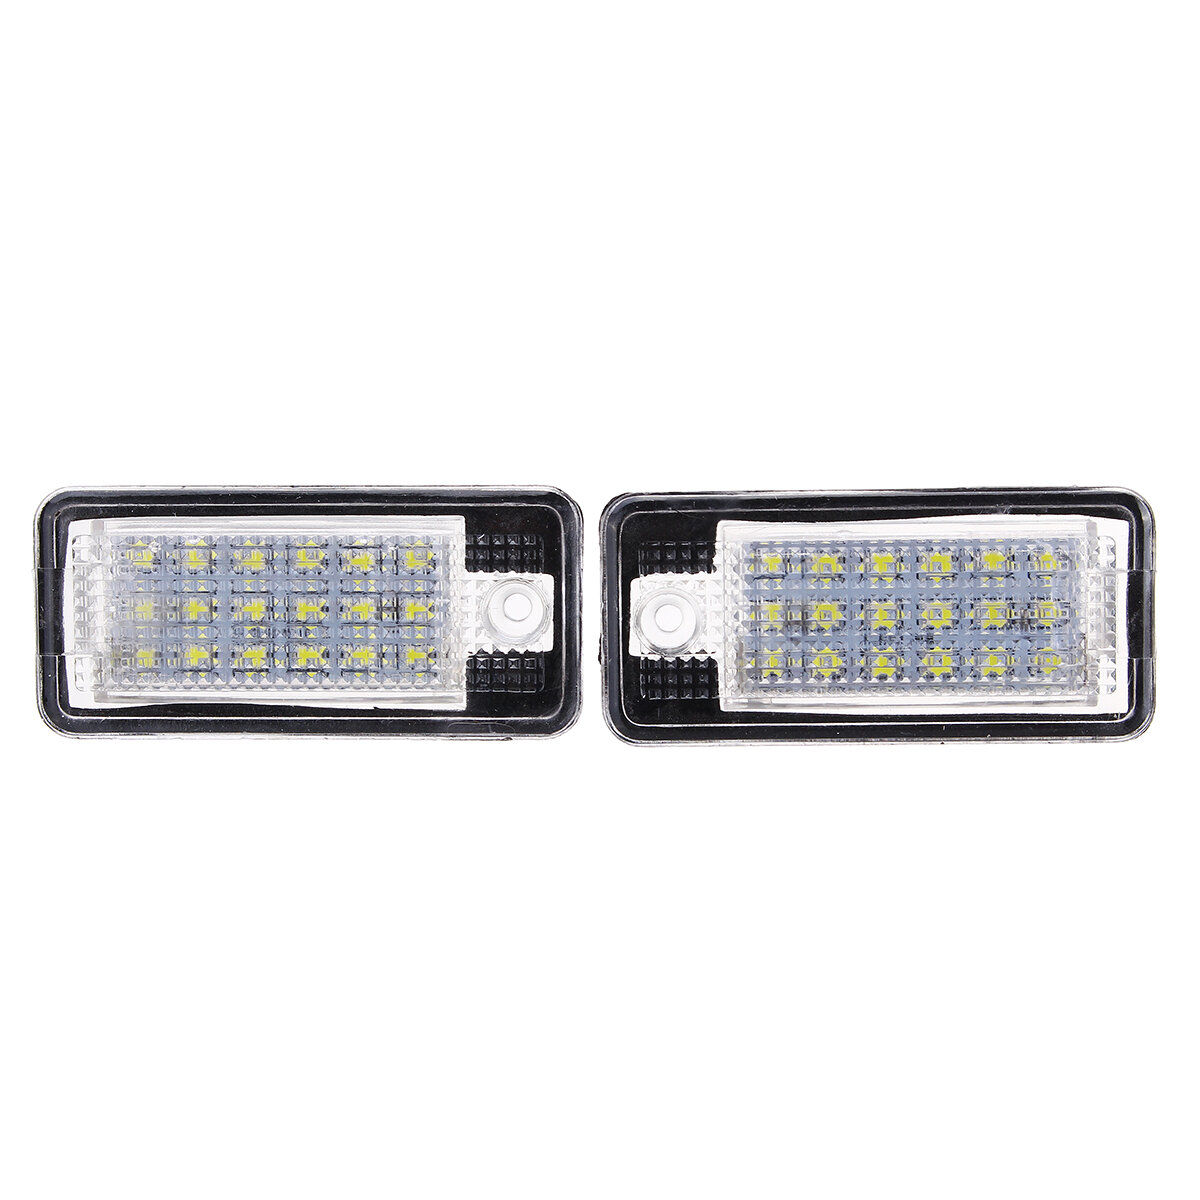 Paar 18LED Kentekenplaatverlichting CANBUS Foutloos Voor Audi A3 S3 A4 A6 S6 A5 RS4